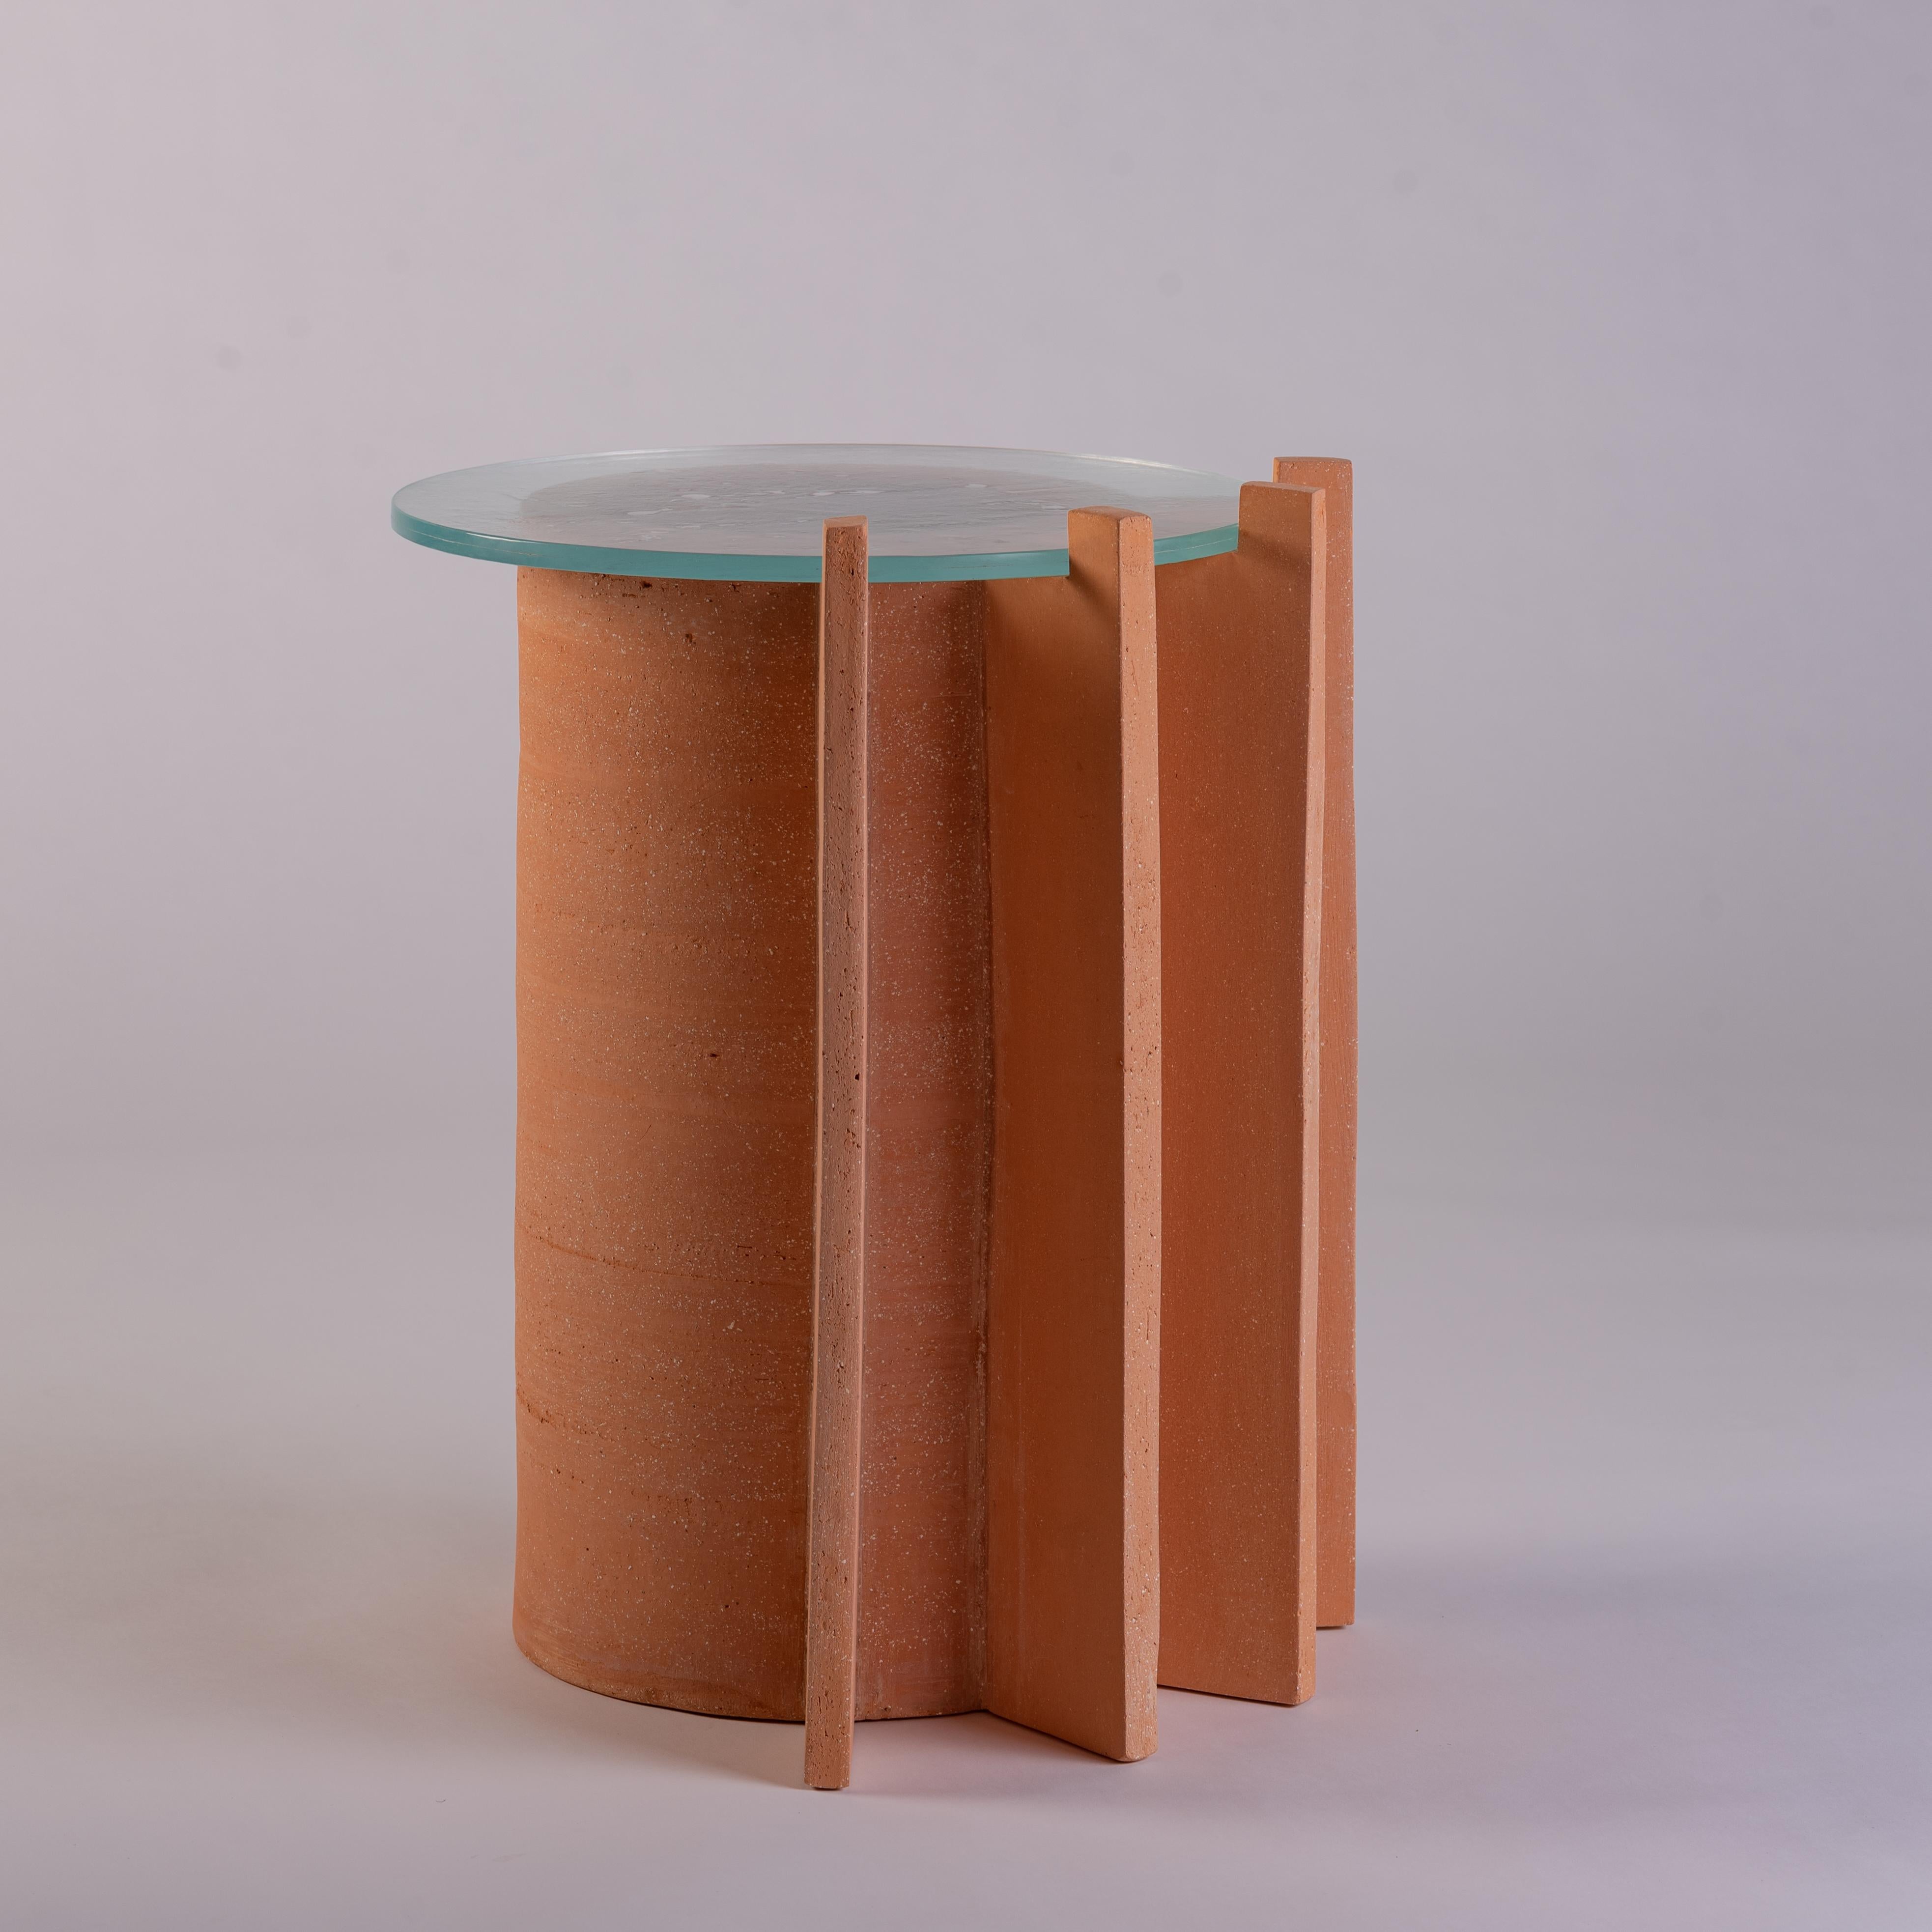 These unique side tables can only be described as a fusion of art, functional design and tradition connecting a space to day-to-day life. Each cylindrical table rises to reach a different height; one bears two decorative fins while the other table